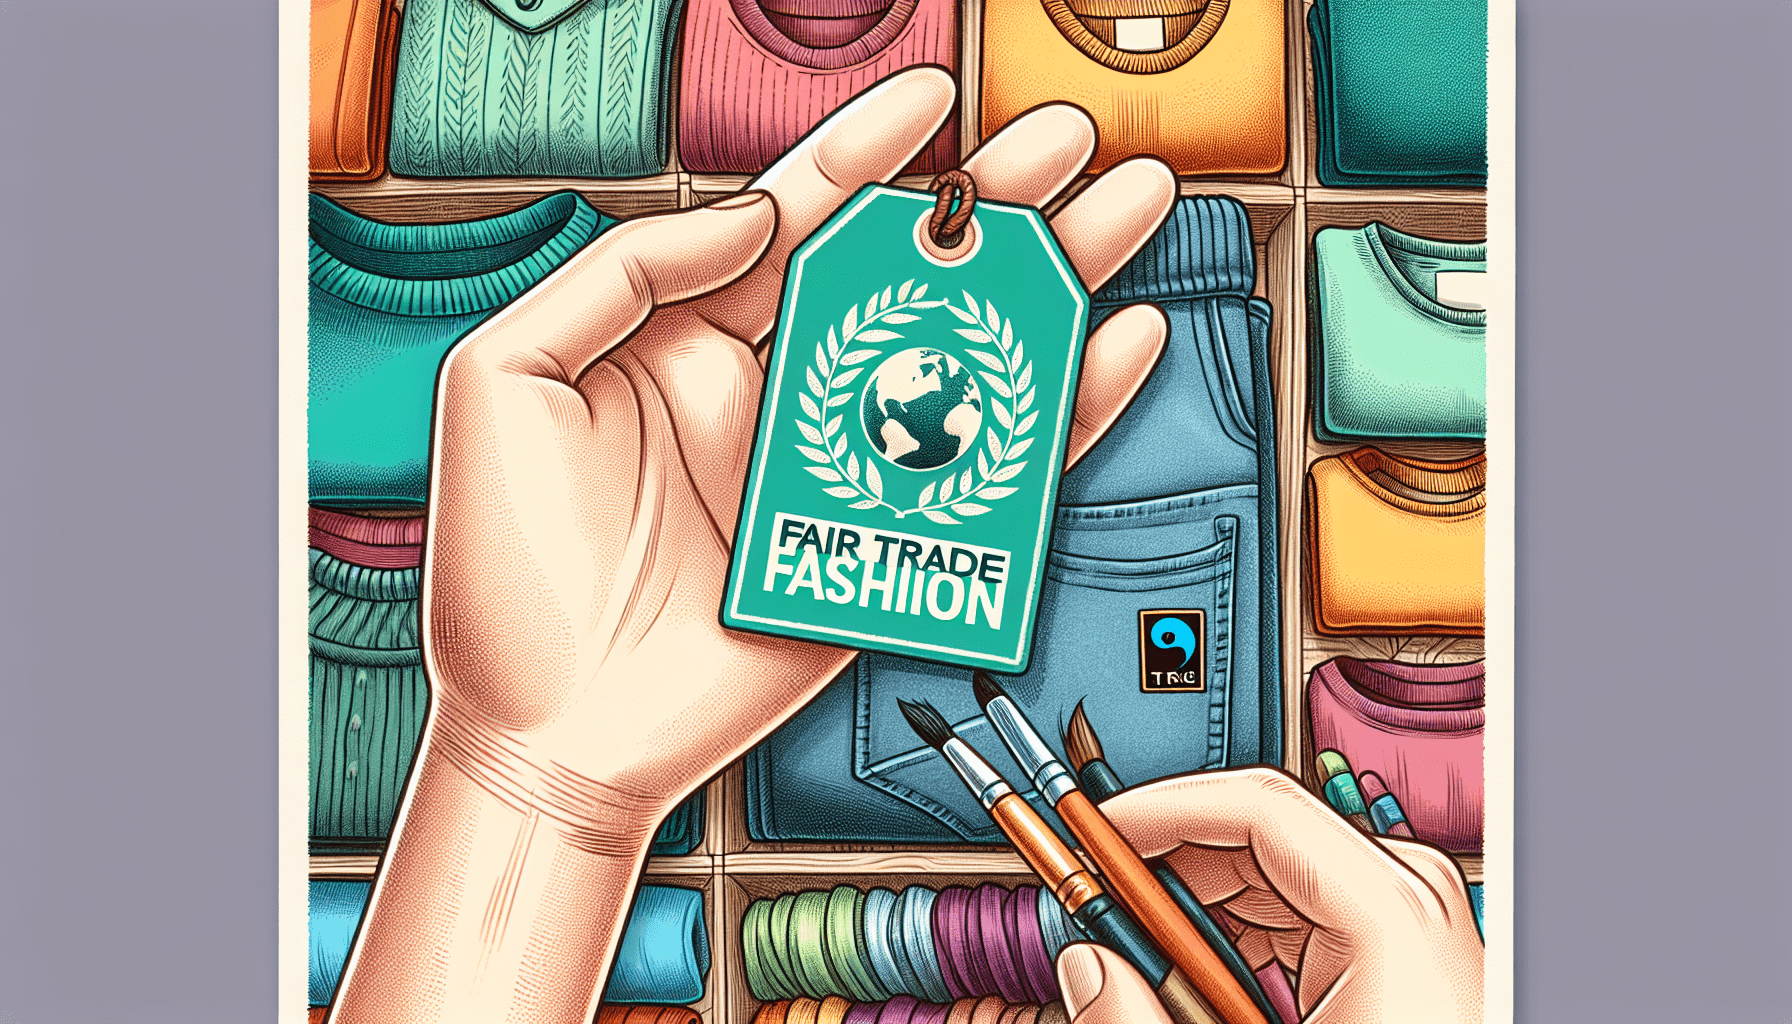 How Can I Support Fair Trade Fashion?